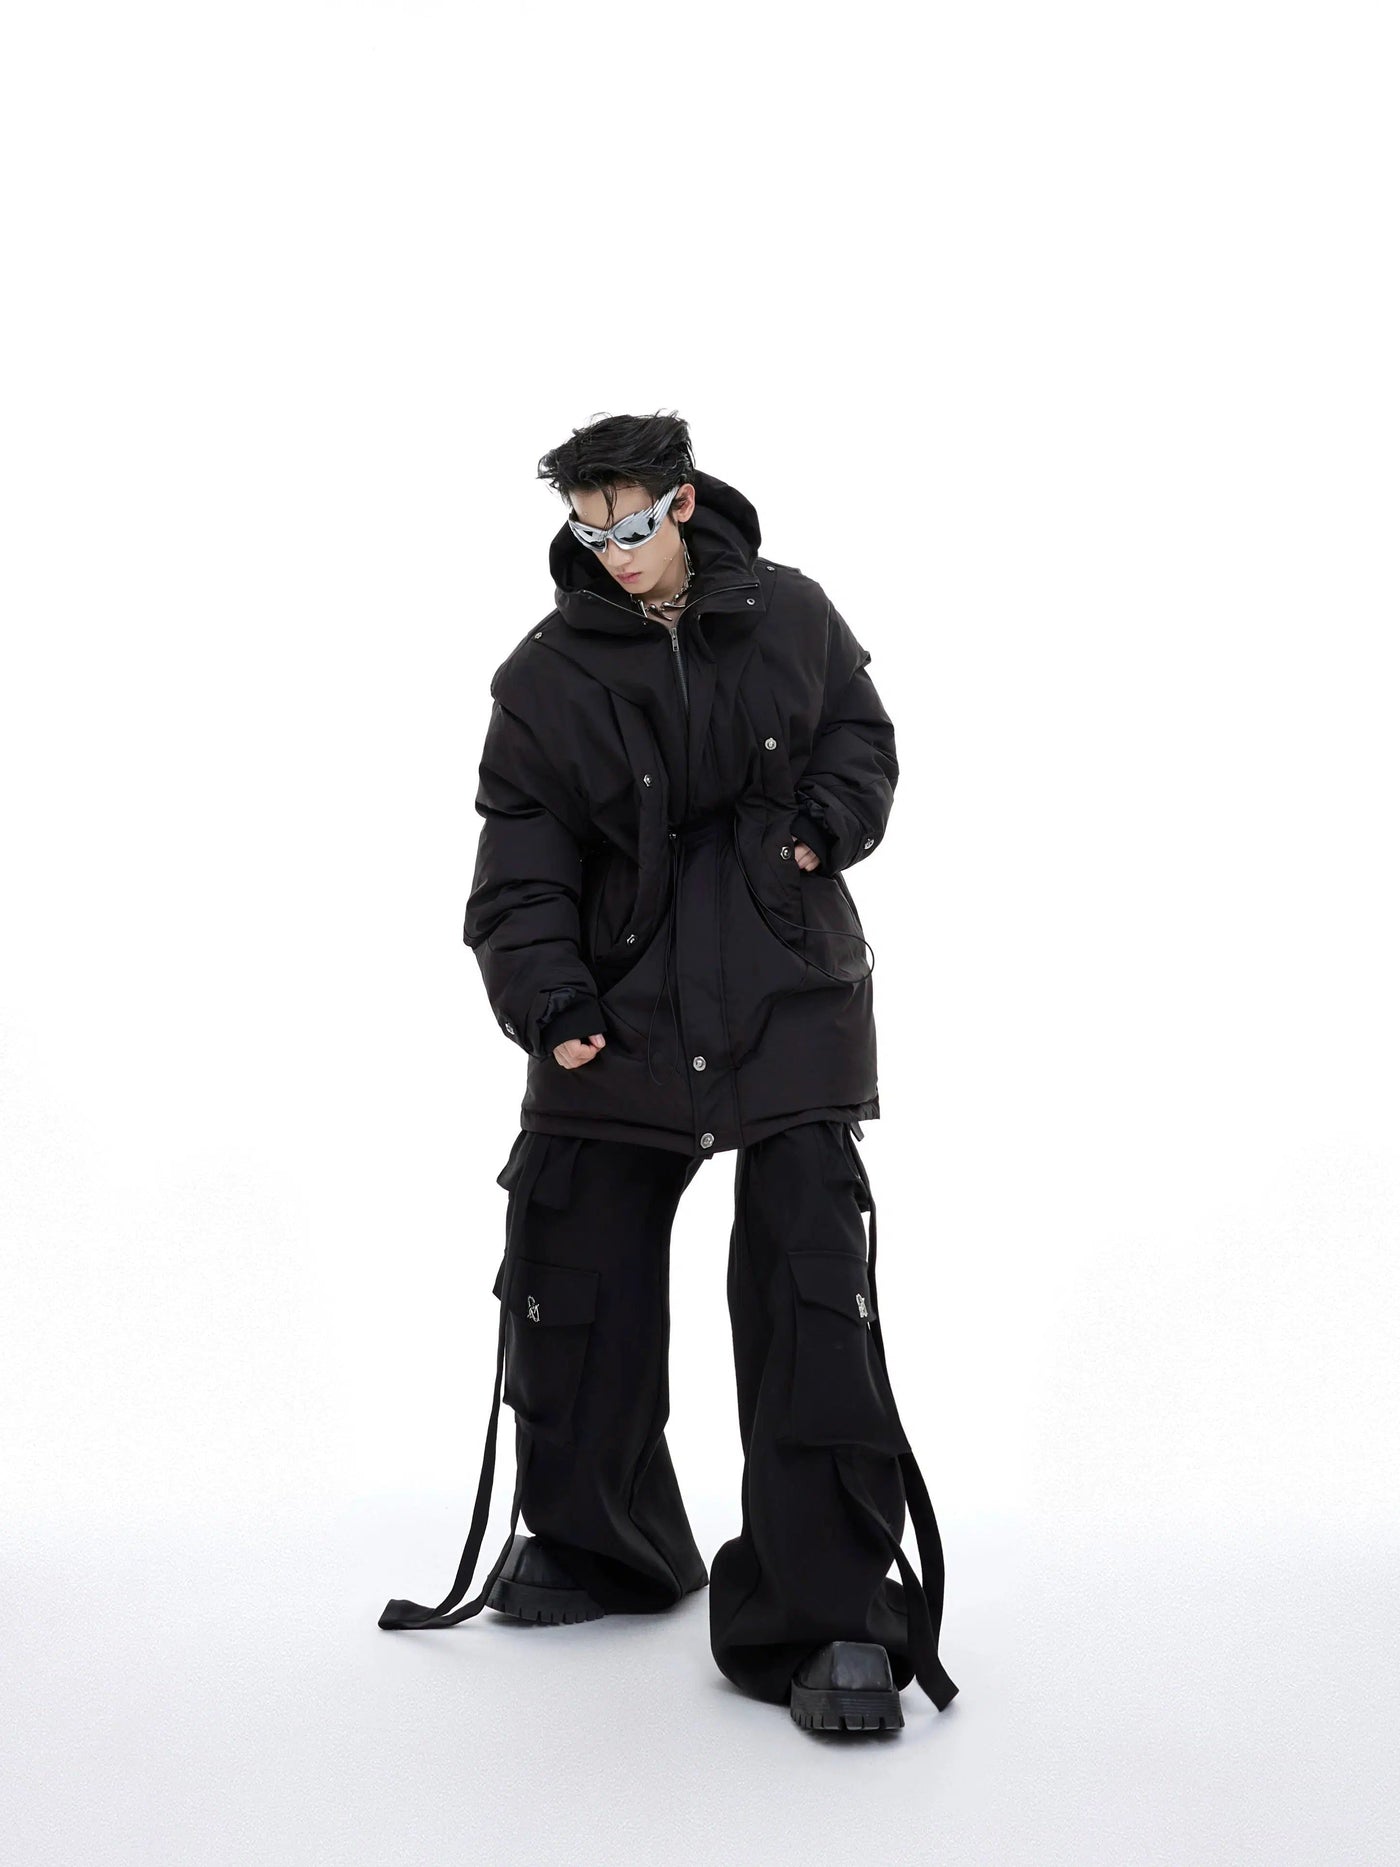 Hooded Long Puffer Jacket Korean Street Fashion Jacket By Argue Culture Shop Online at OH Vault